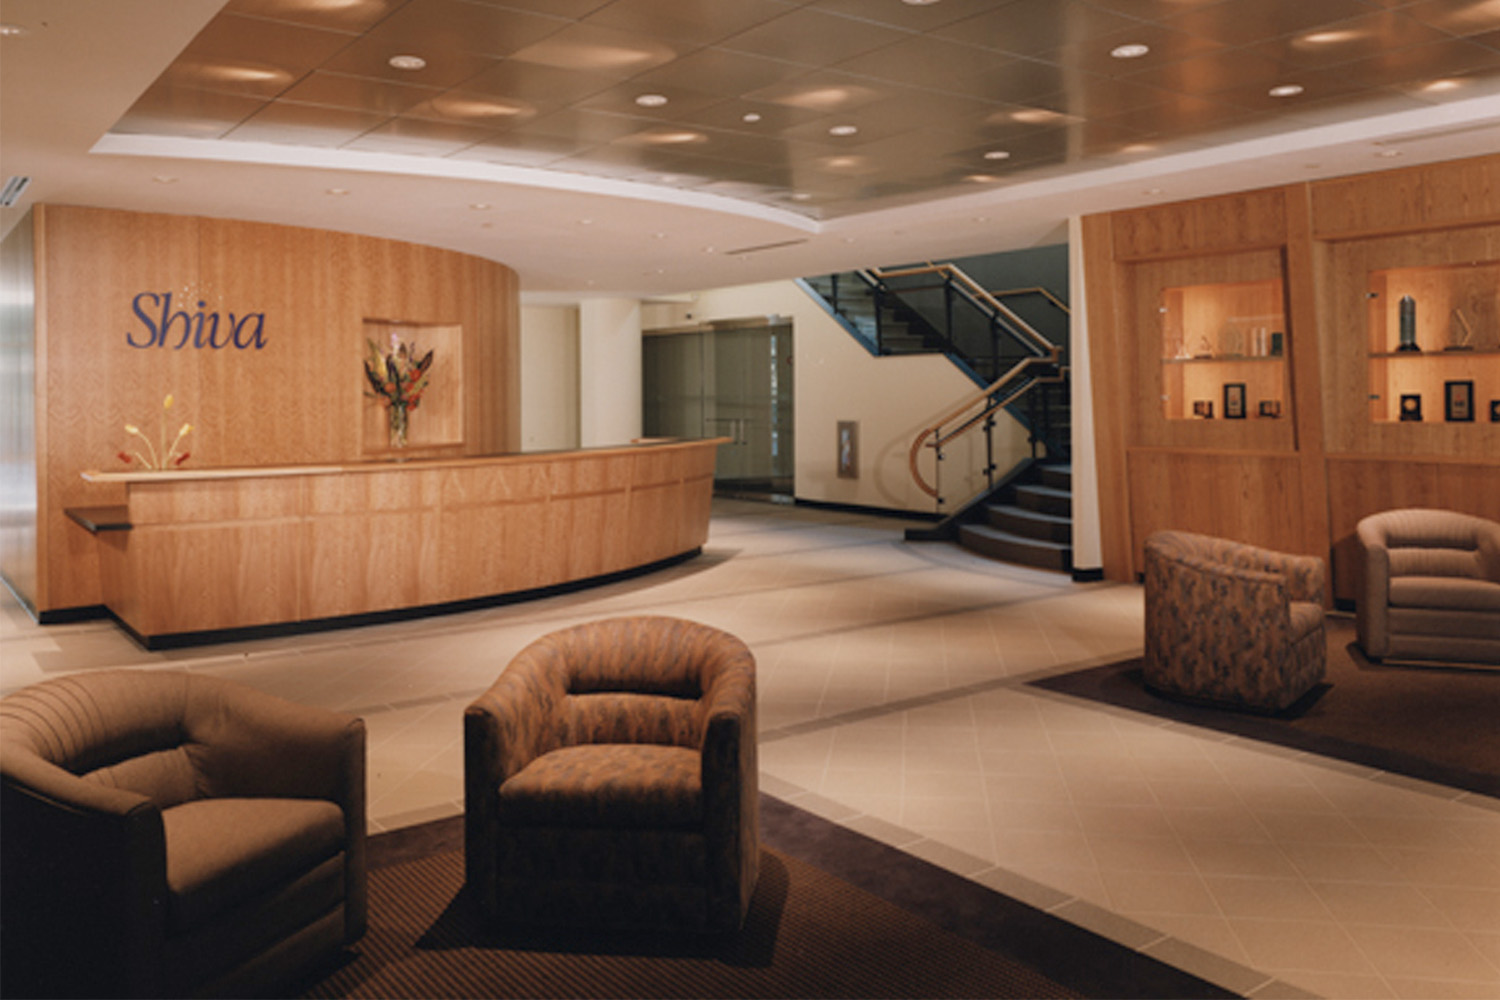 Lobby with plush seats, wooden walls, and wooden reception desk 